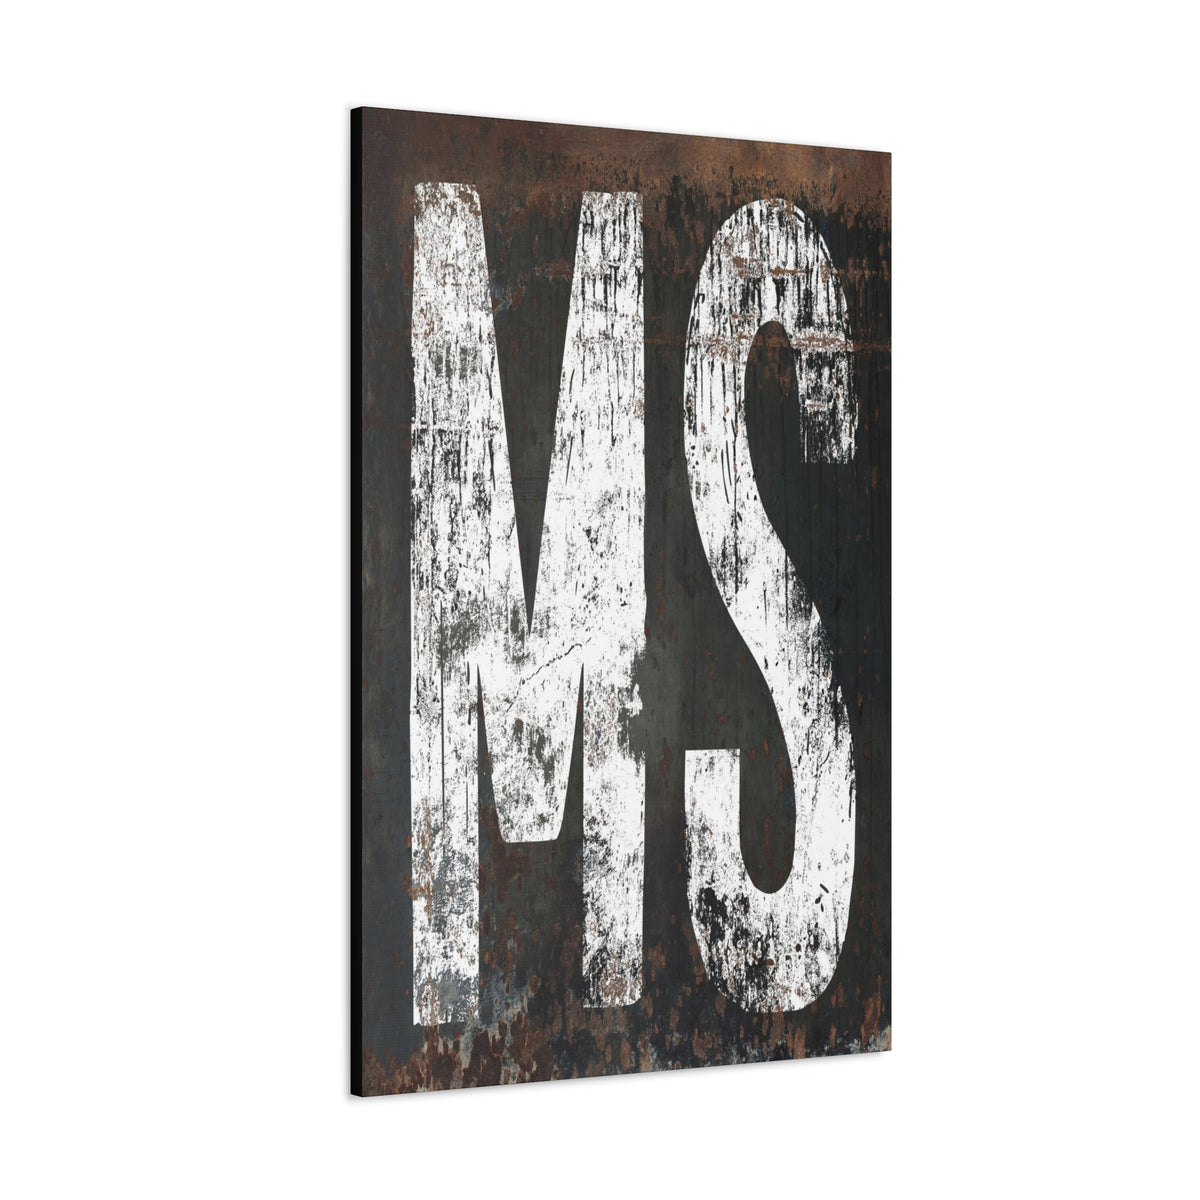 Vintage Mississippi Home State Canvas Wall Art: Industrial & Western Farmhouse Fusion for Modern & Eclectic Homes